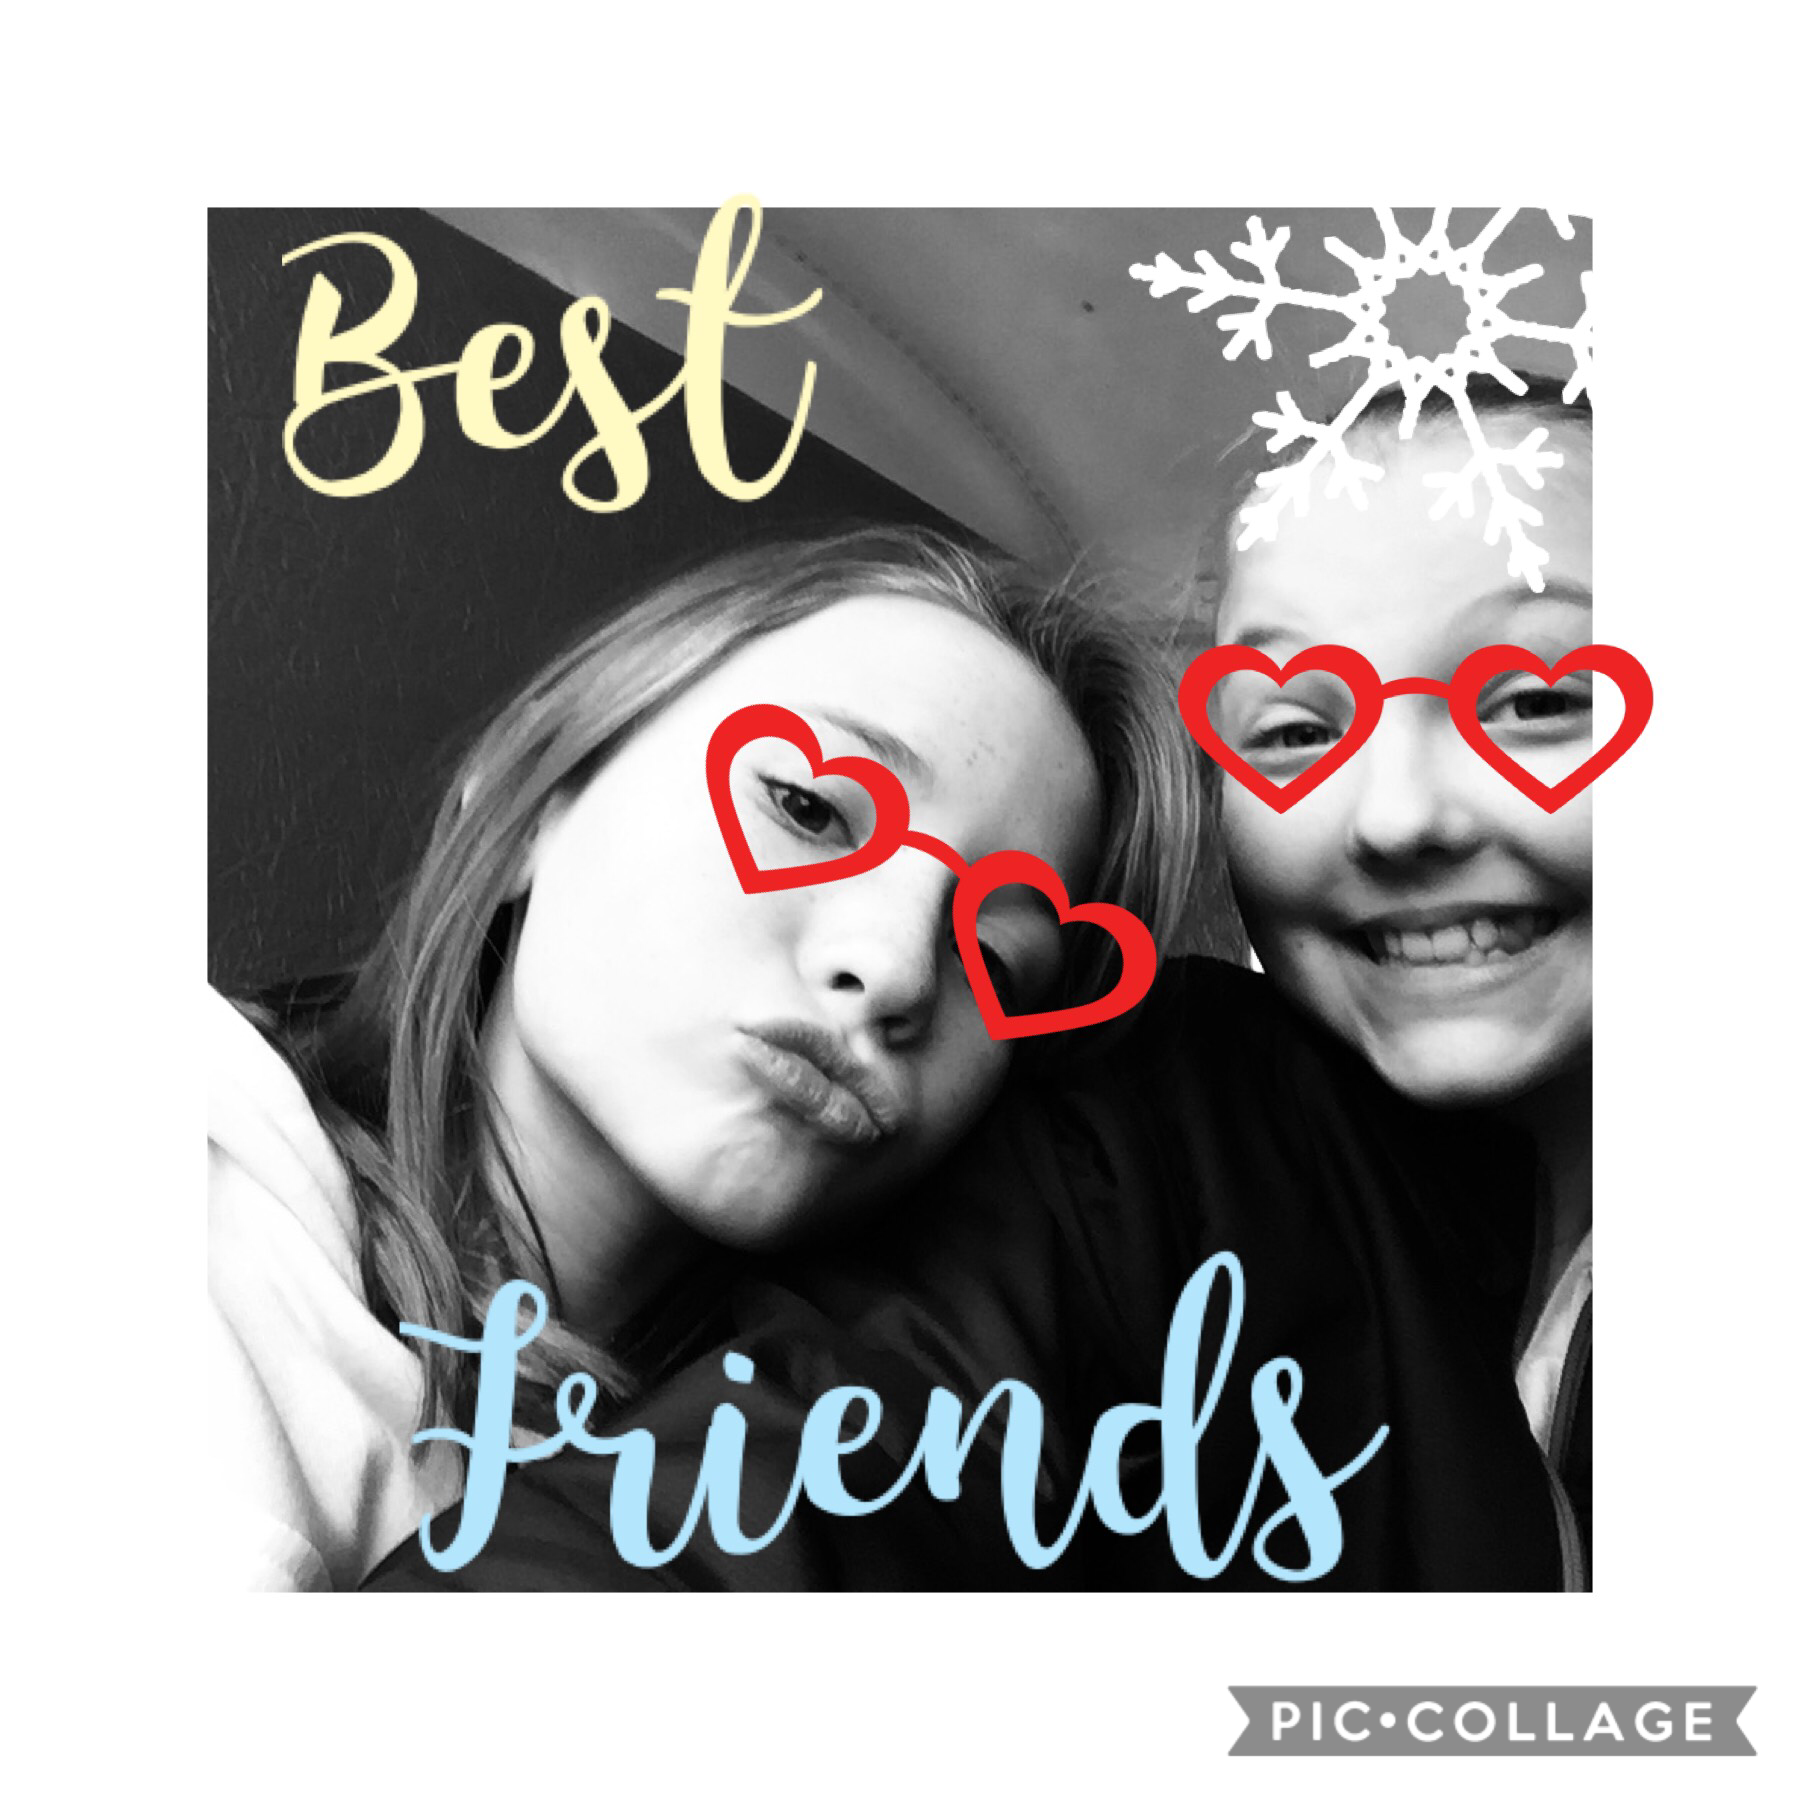 Best friends forever tap